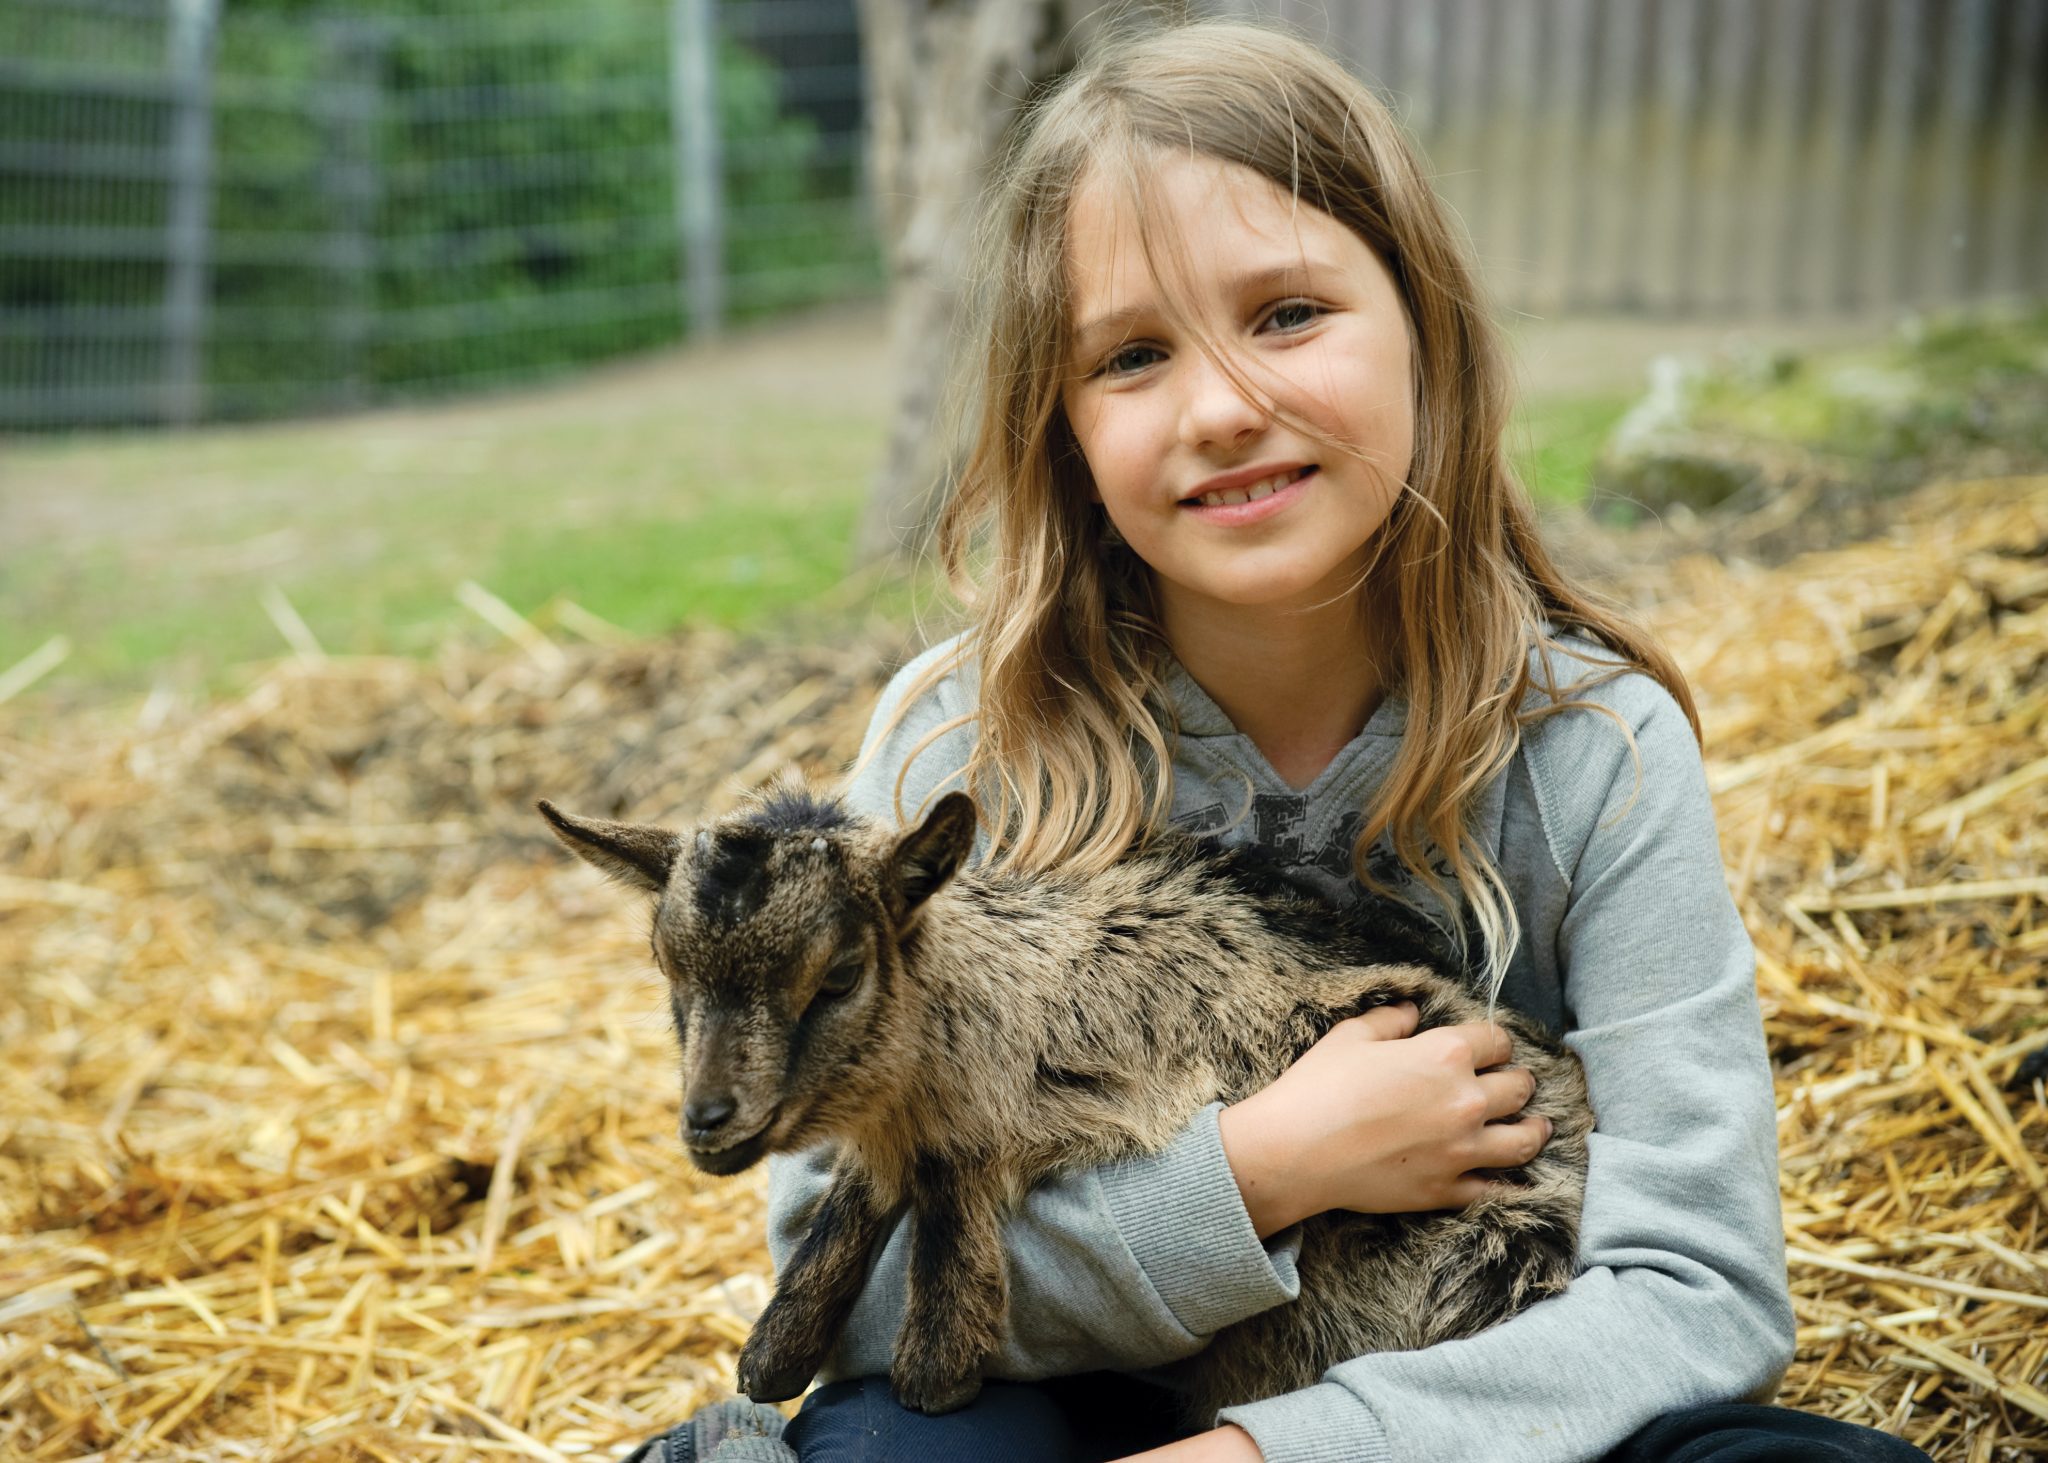 Young girl holding a young goat.